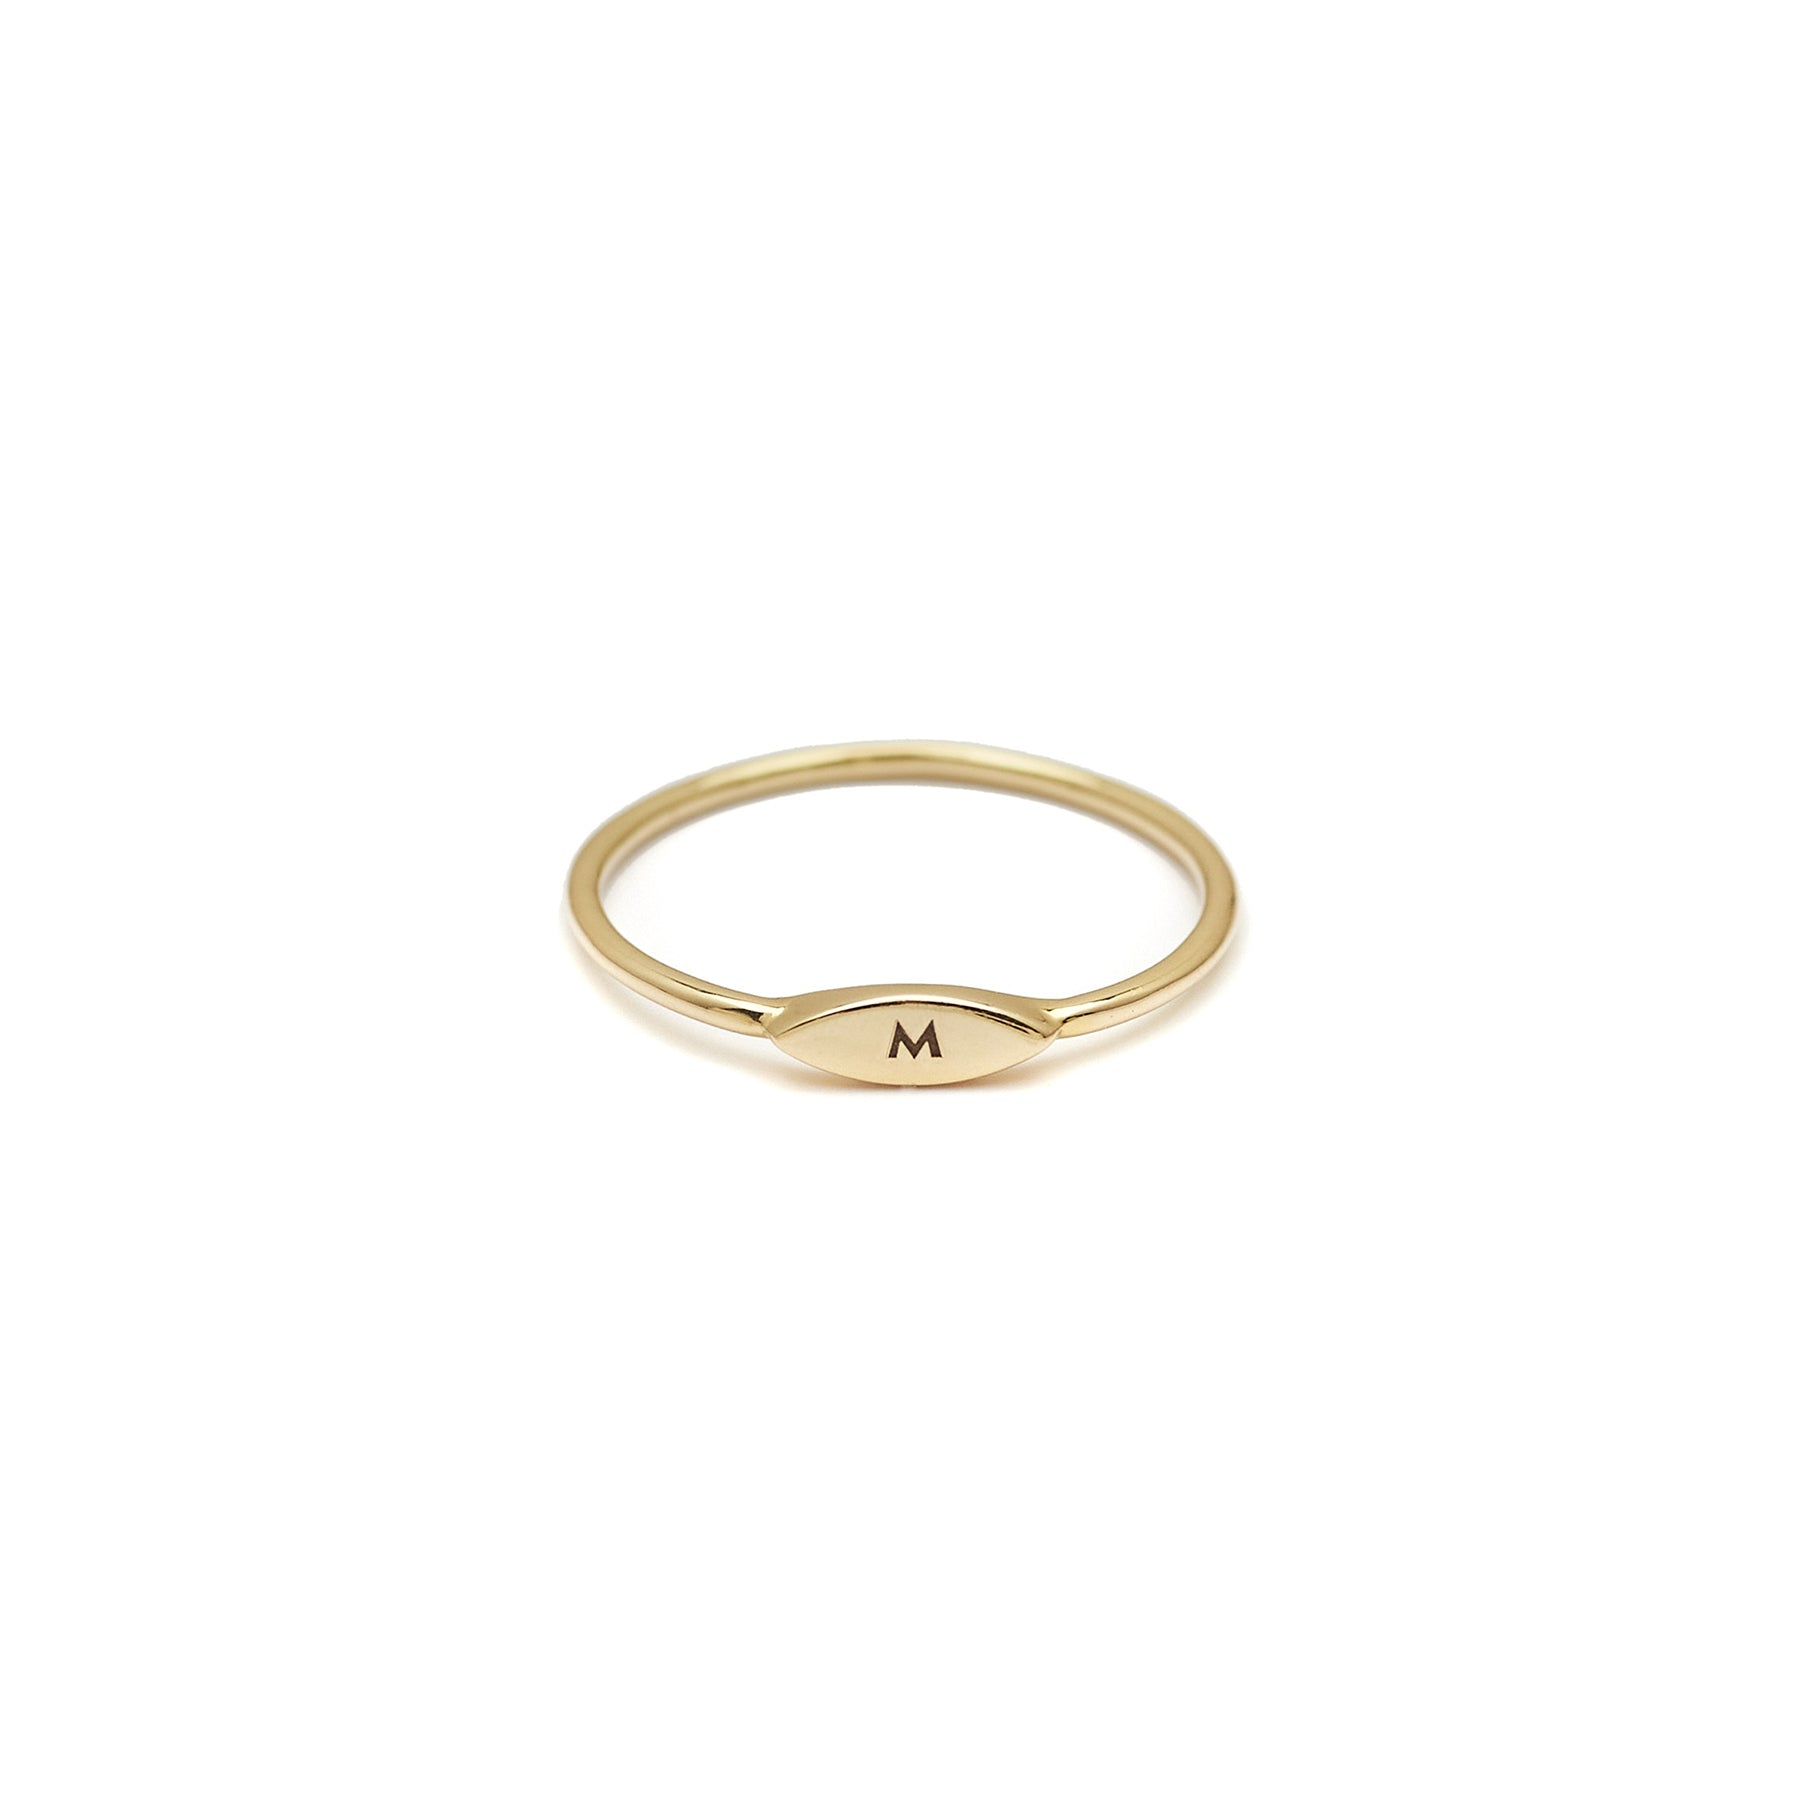 14k gold personalised engraved ring